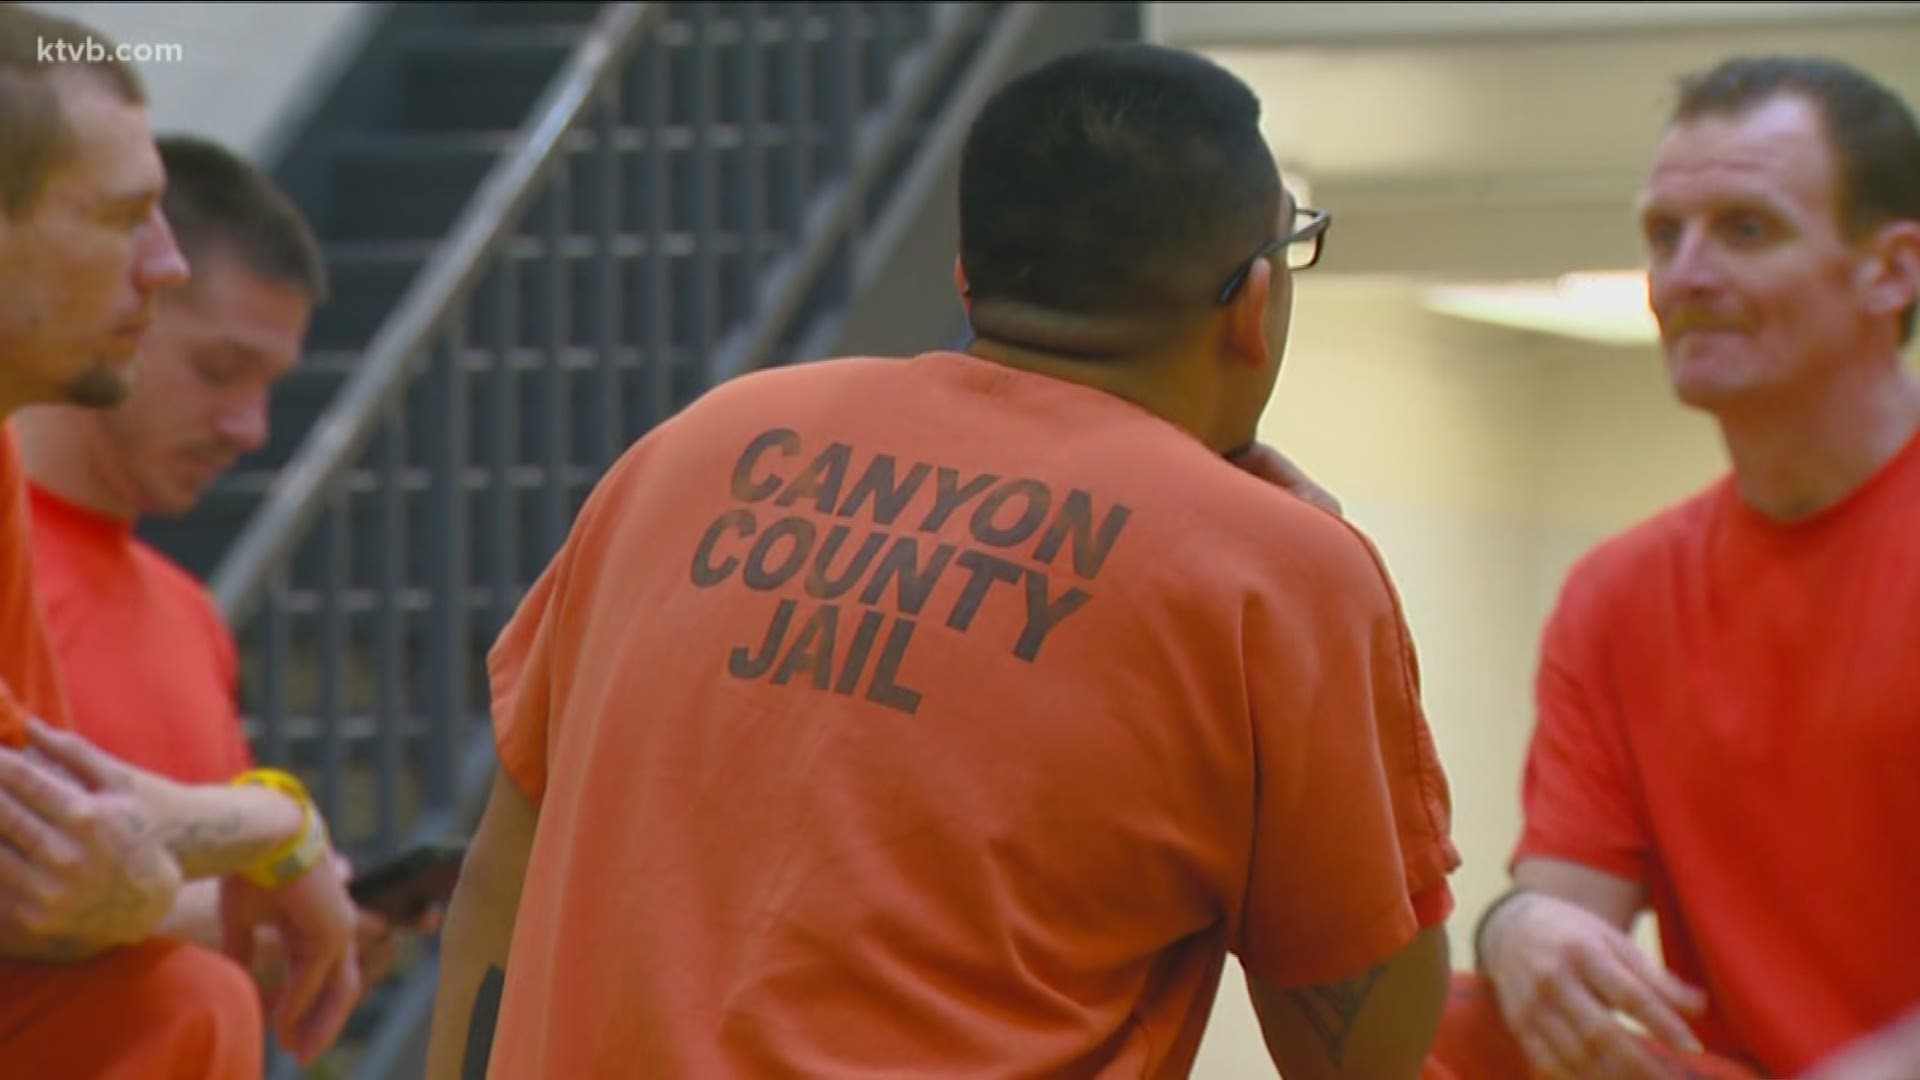 Those riots happened in the Canyon County Jail last month.